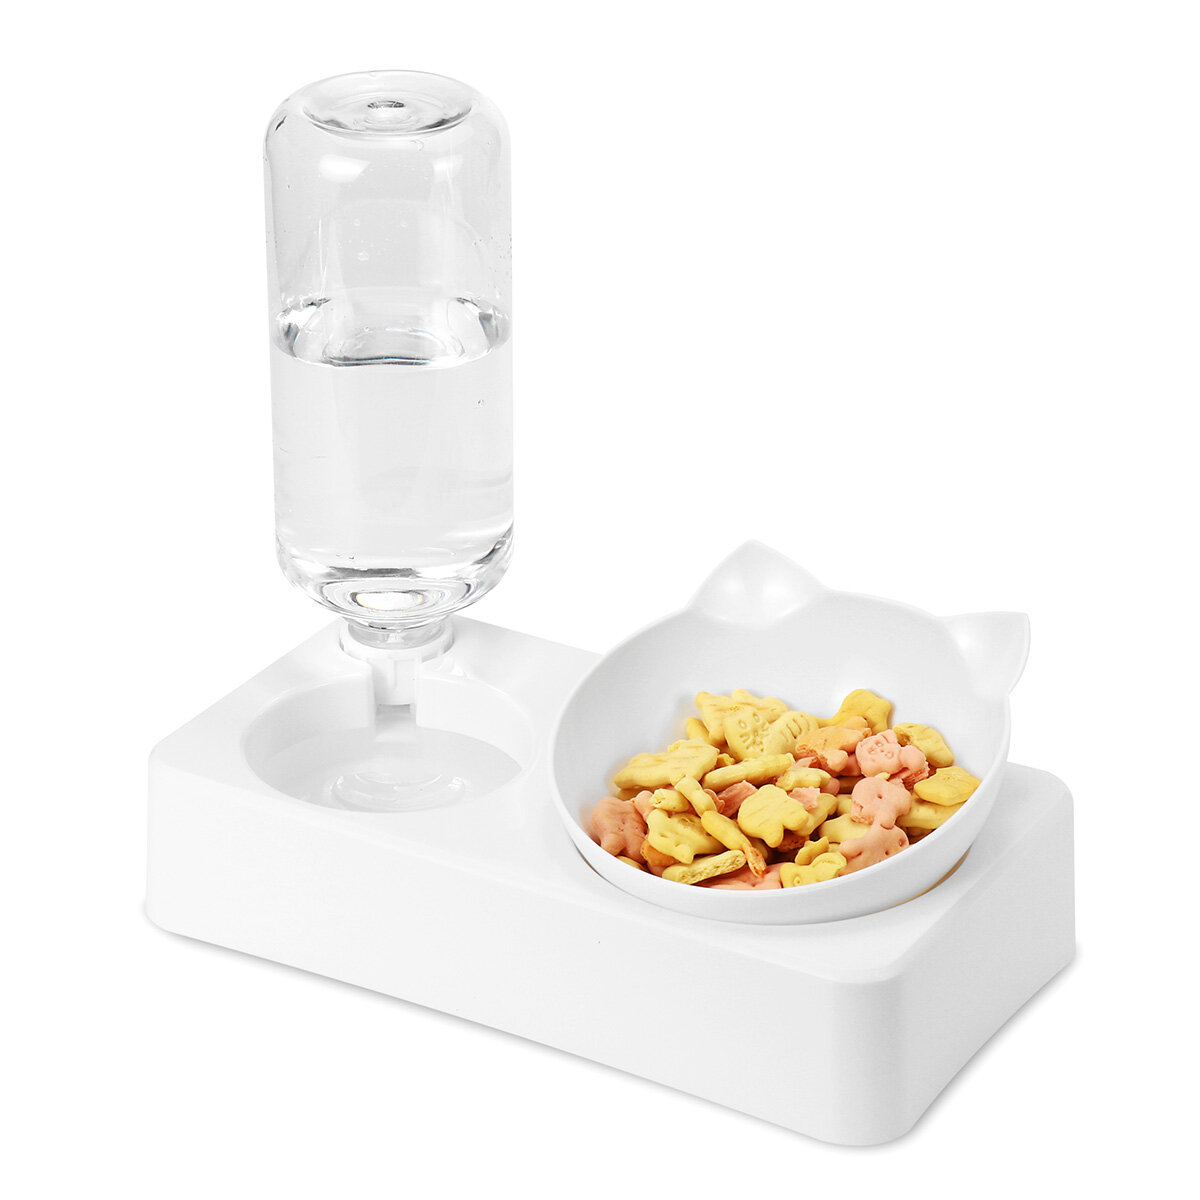 best price,automatic,refill,double,bowl,eu,discount